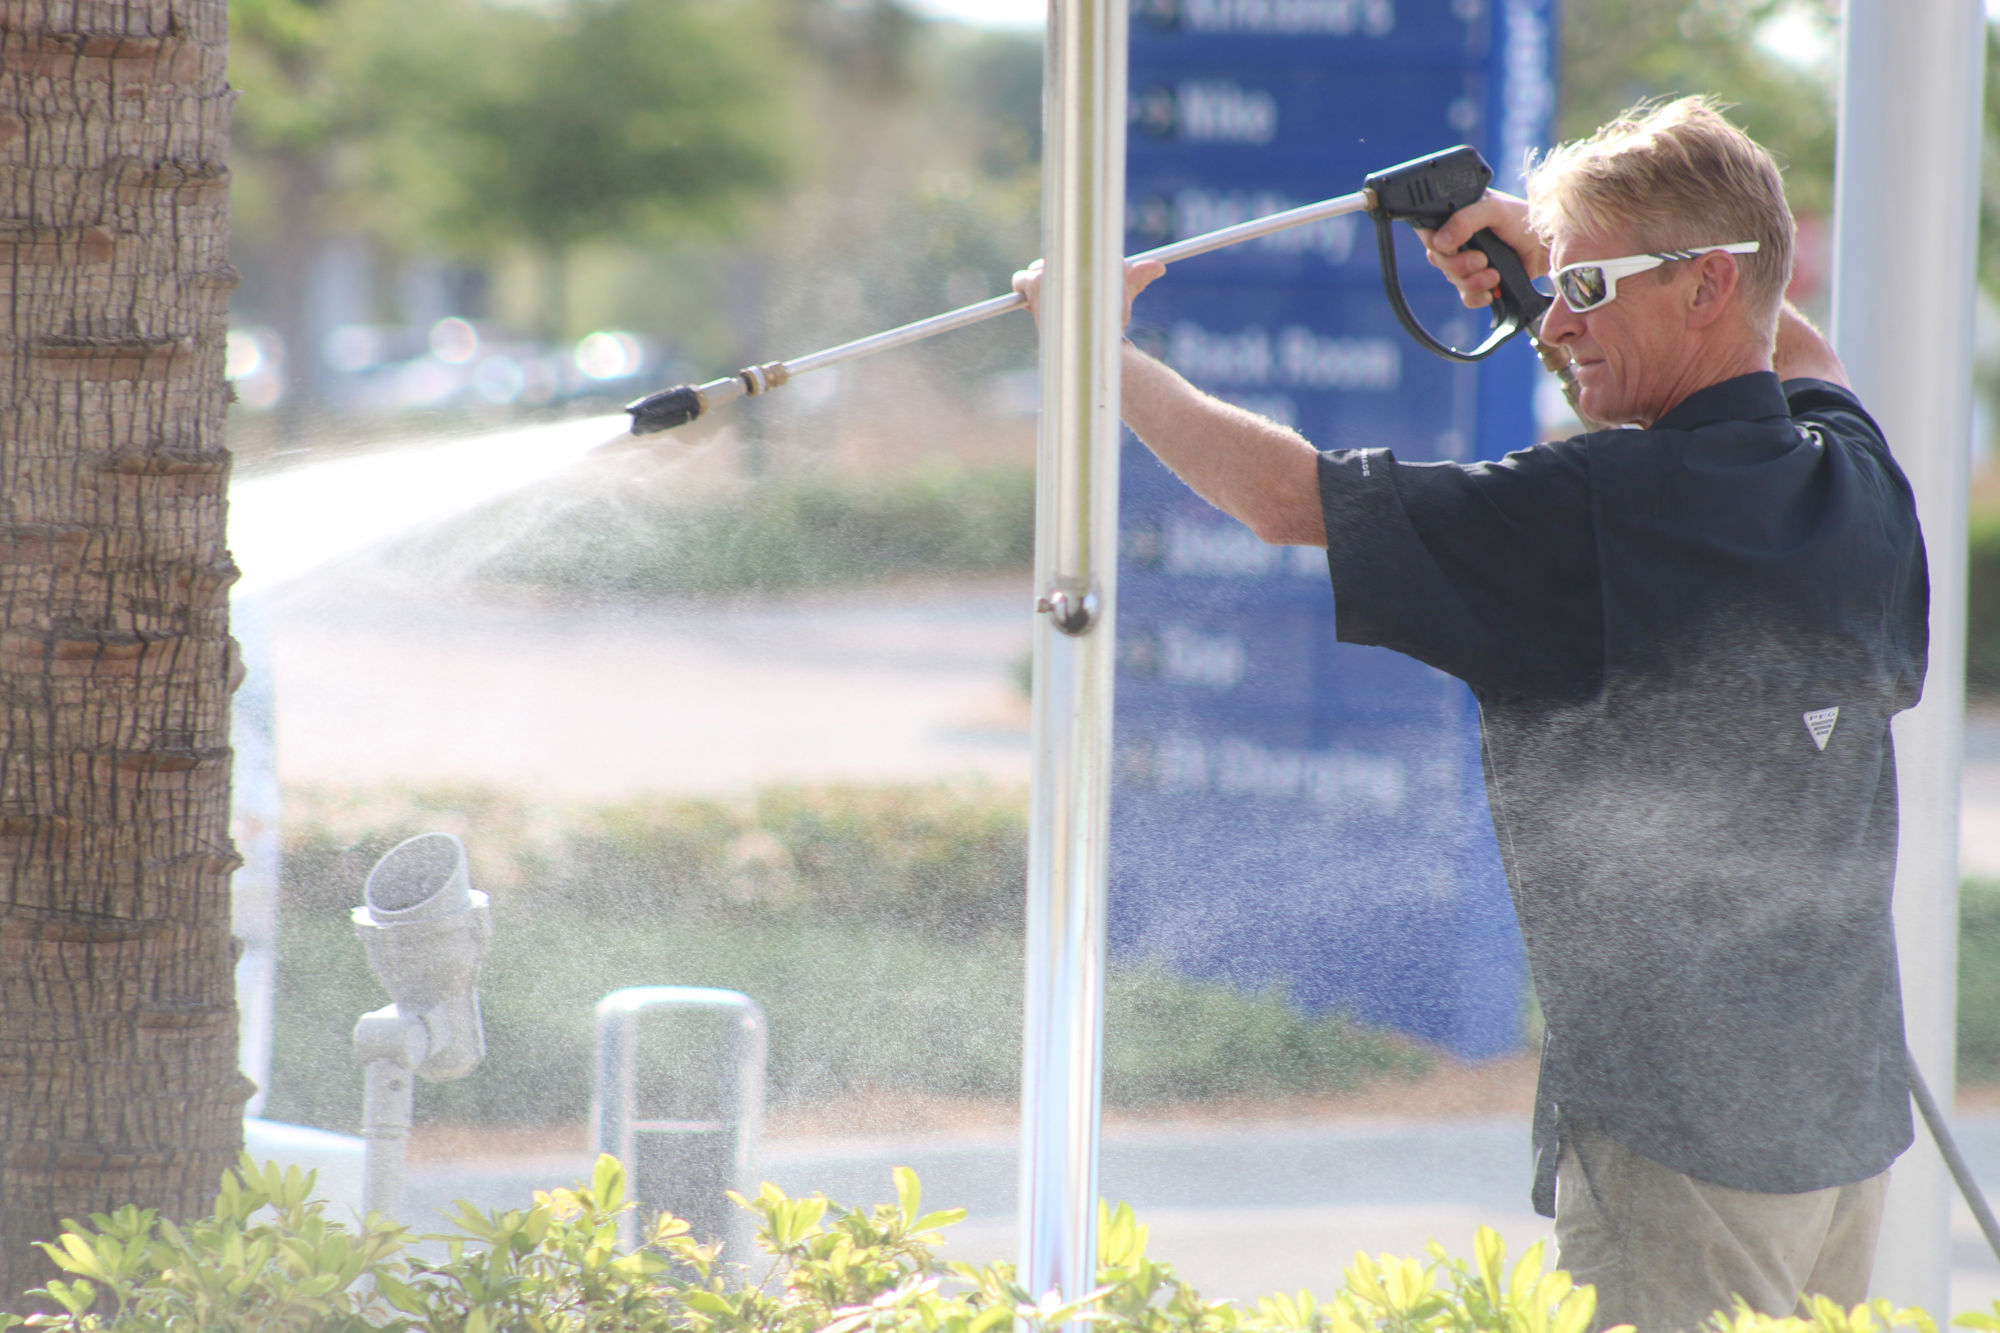 Chris Cope cleans the splash pad at Tanger Outlets on Wednesday, March 18. Photo by Jarleene Almenas